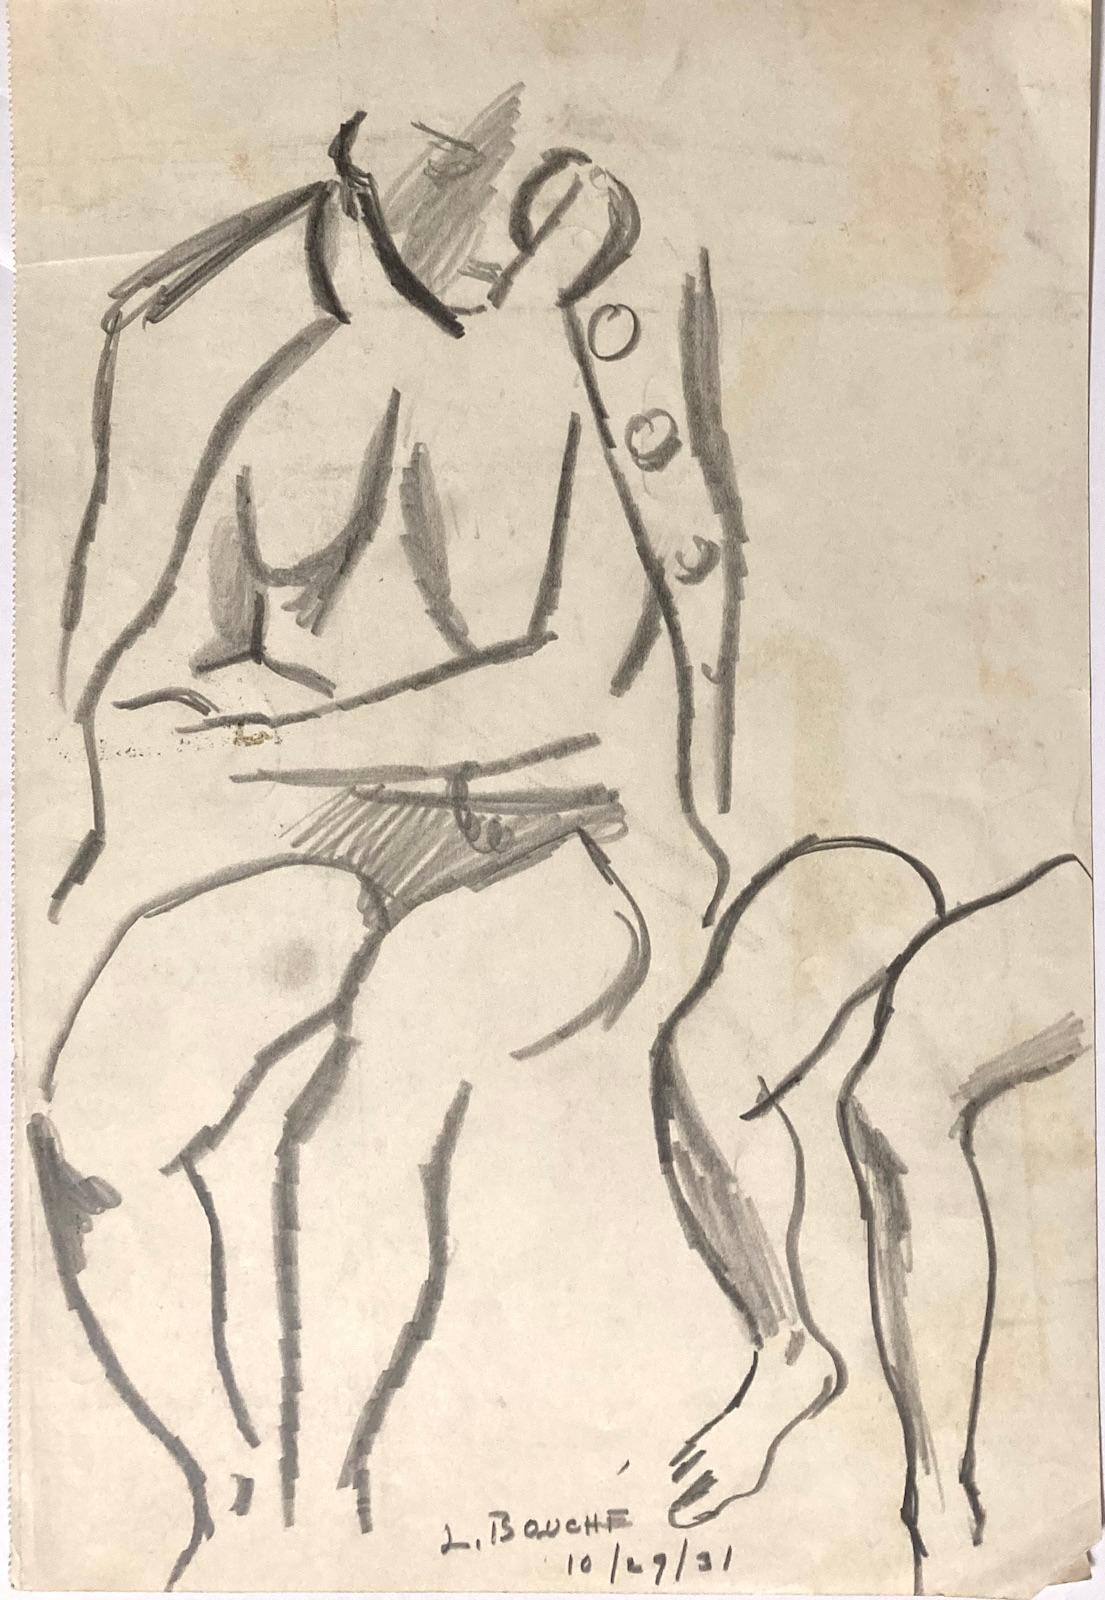 Louis Bouché was based in New York and taught at the Art Students League. The figure, and nudes especially, were an important subject in his oeuvre. The dimensions, 14 1/4 x 9 5/8 inches, are for the size of the sheet. The drawing is signed and